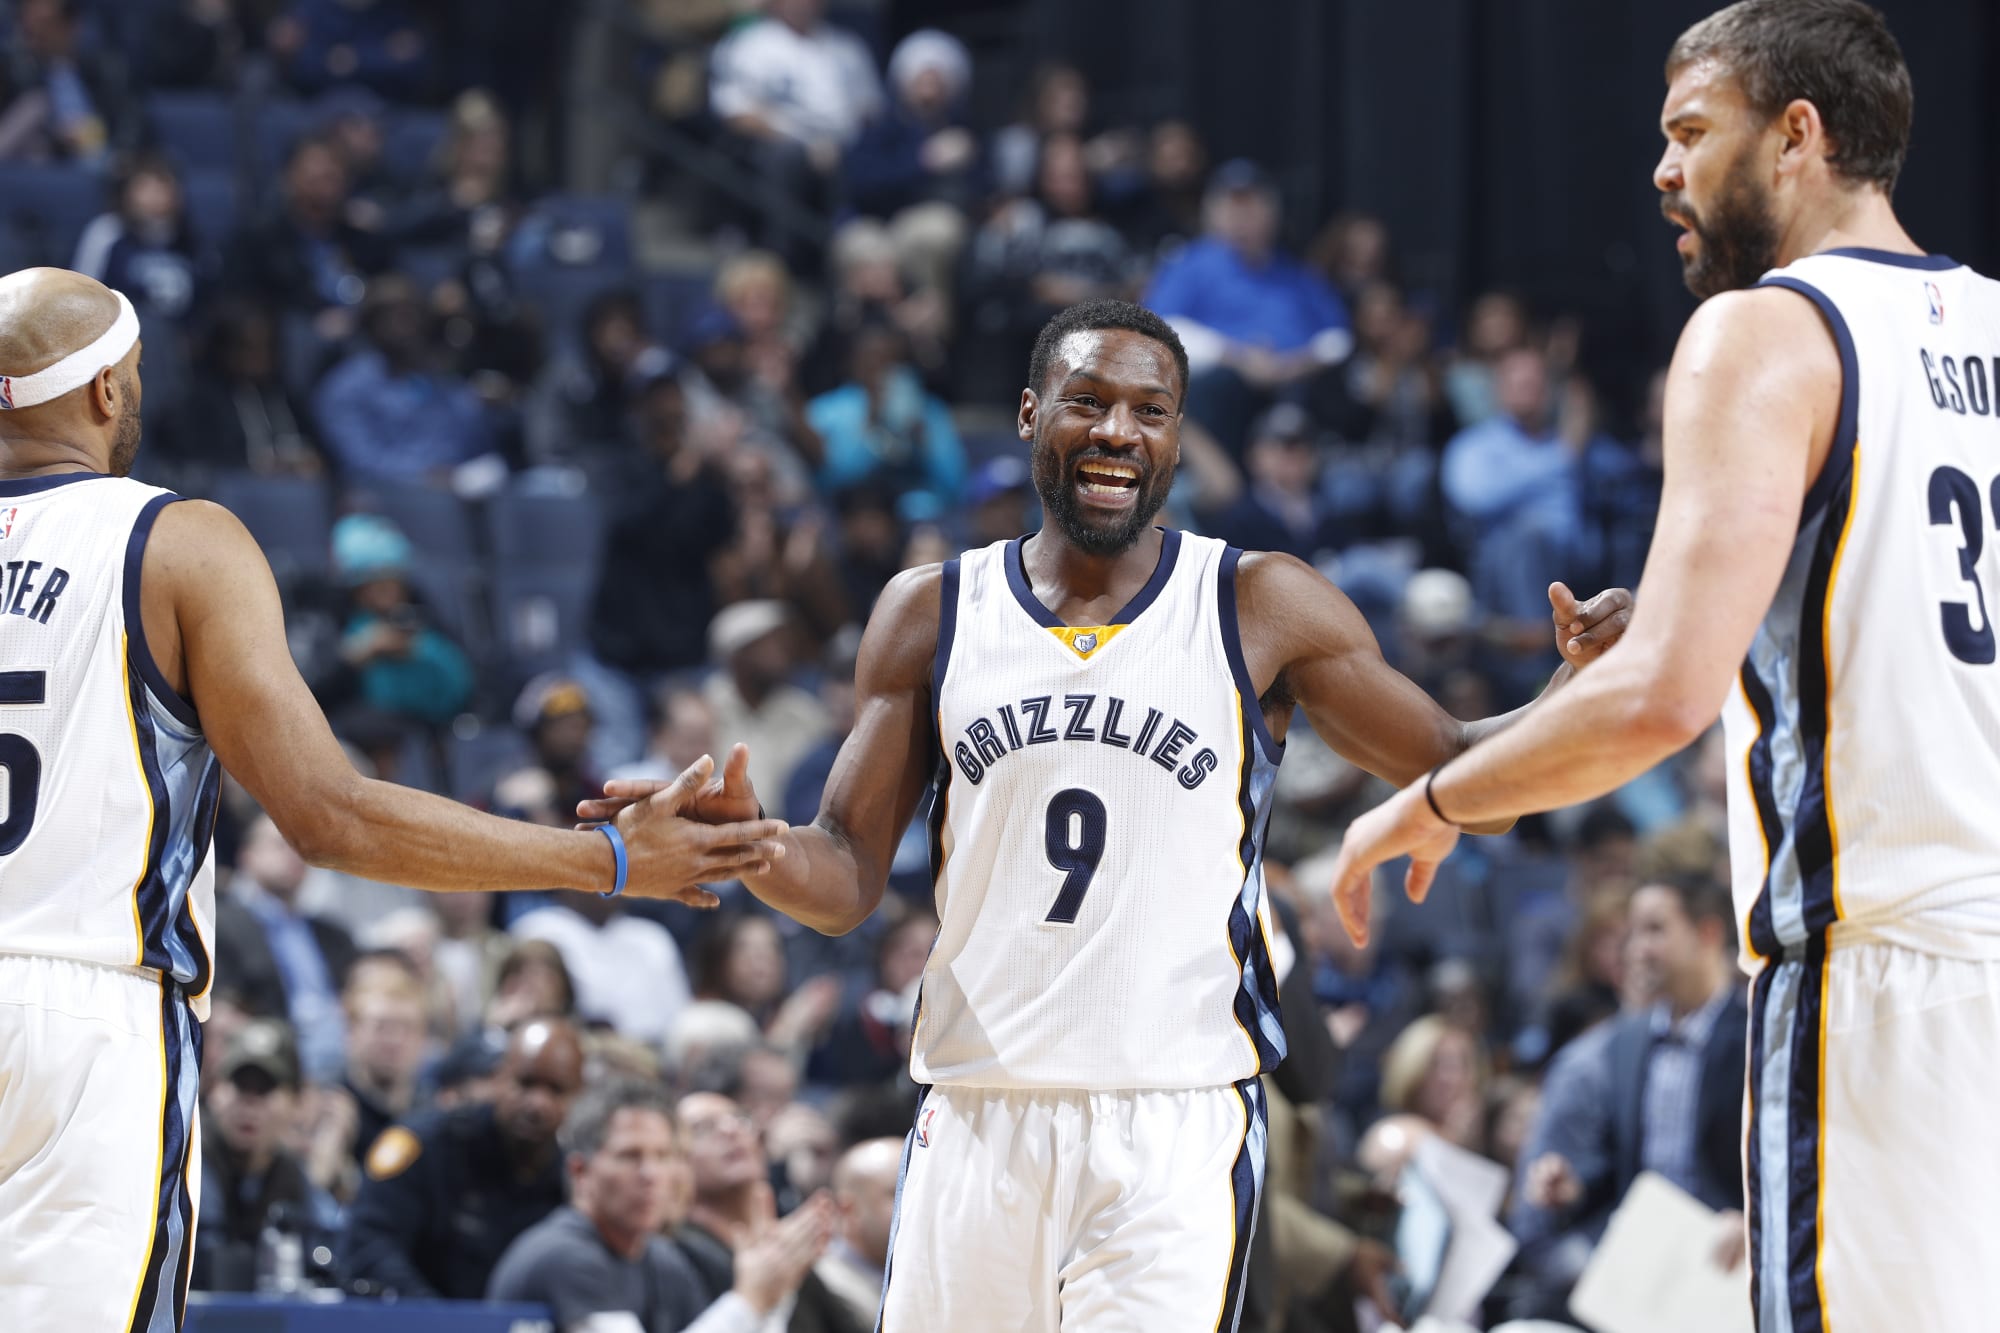 Grizzlies preview: With Grit 'N Grind gone, time for Memphis to